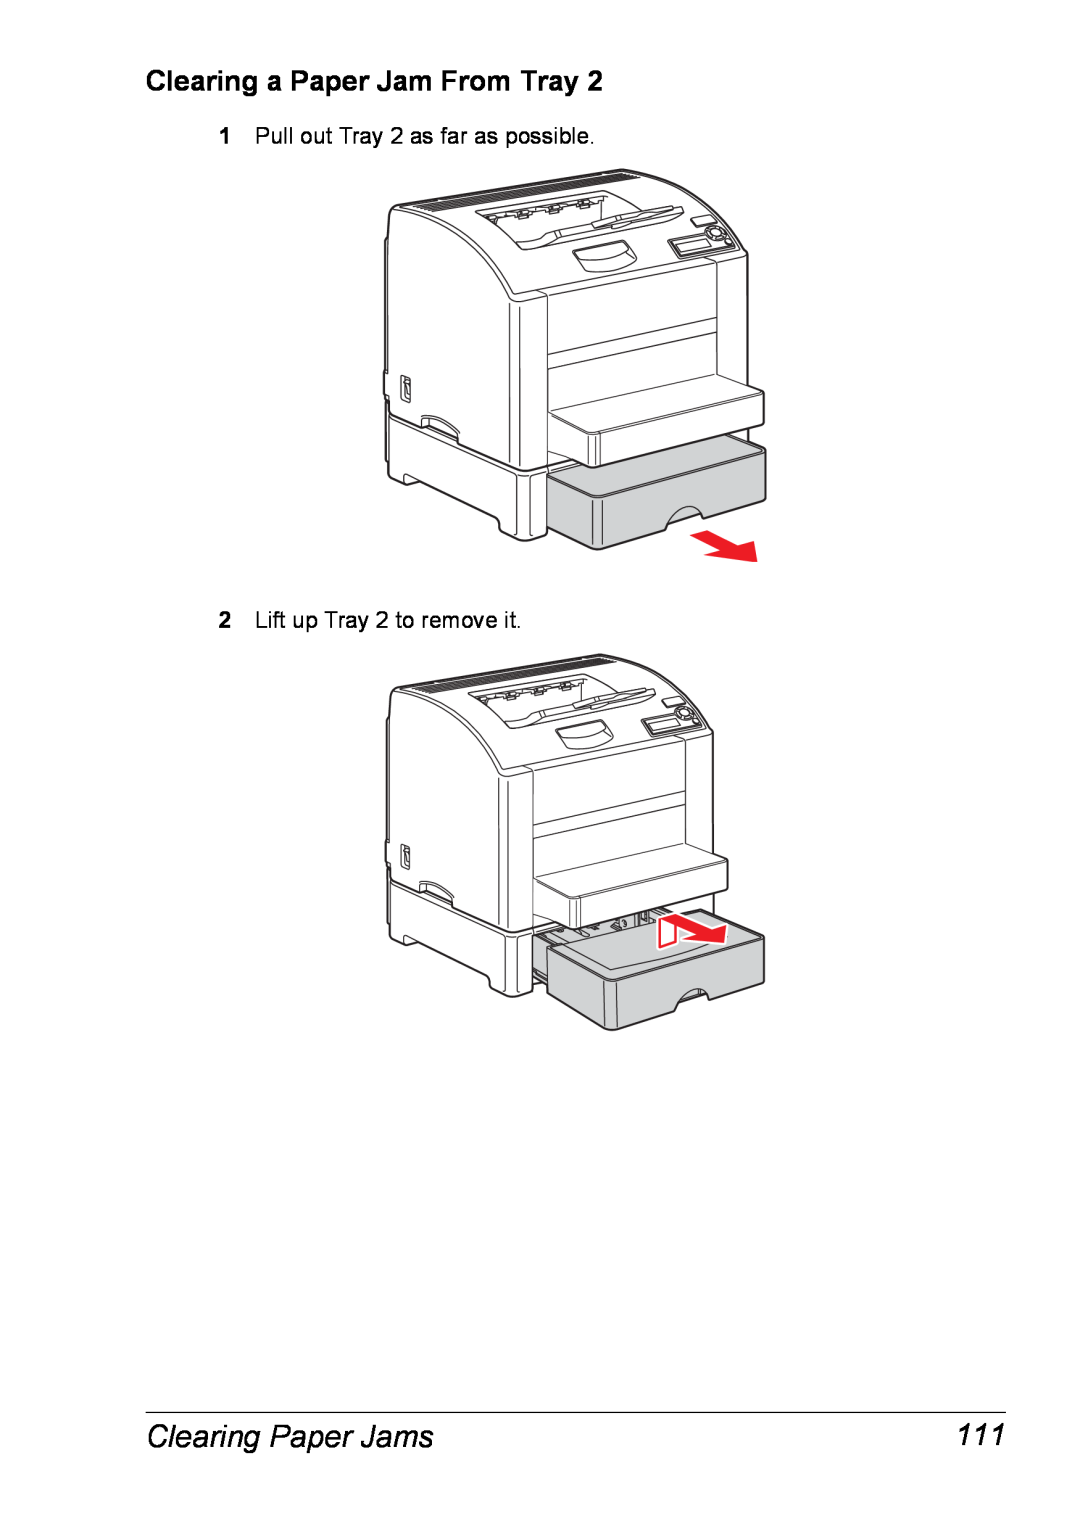 Xerox 6120 manual Clearing a Paper Jam From Tray, Clearing Paper Jams 